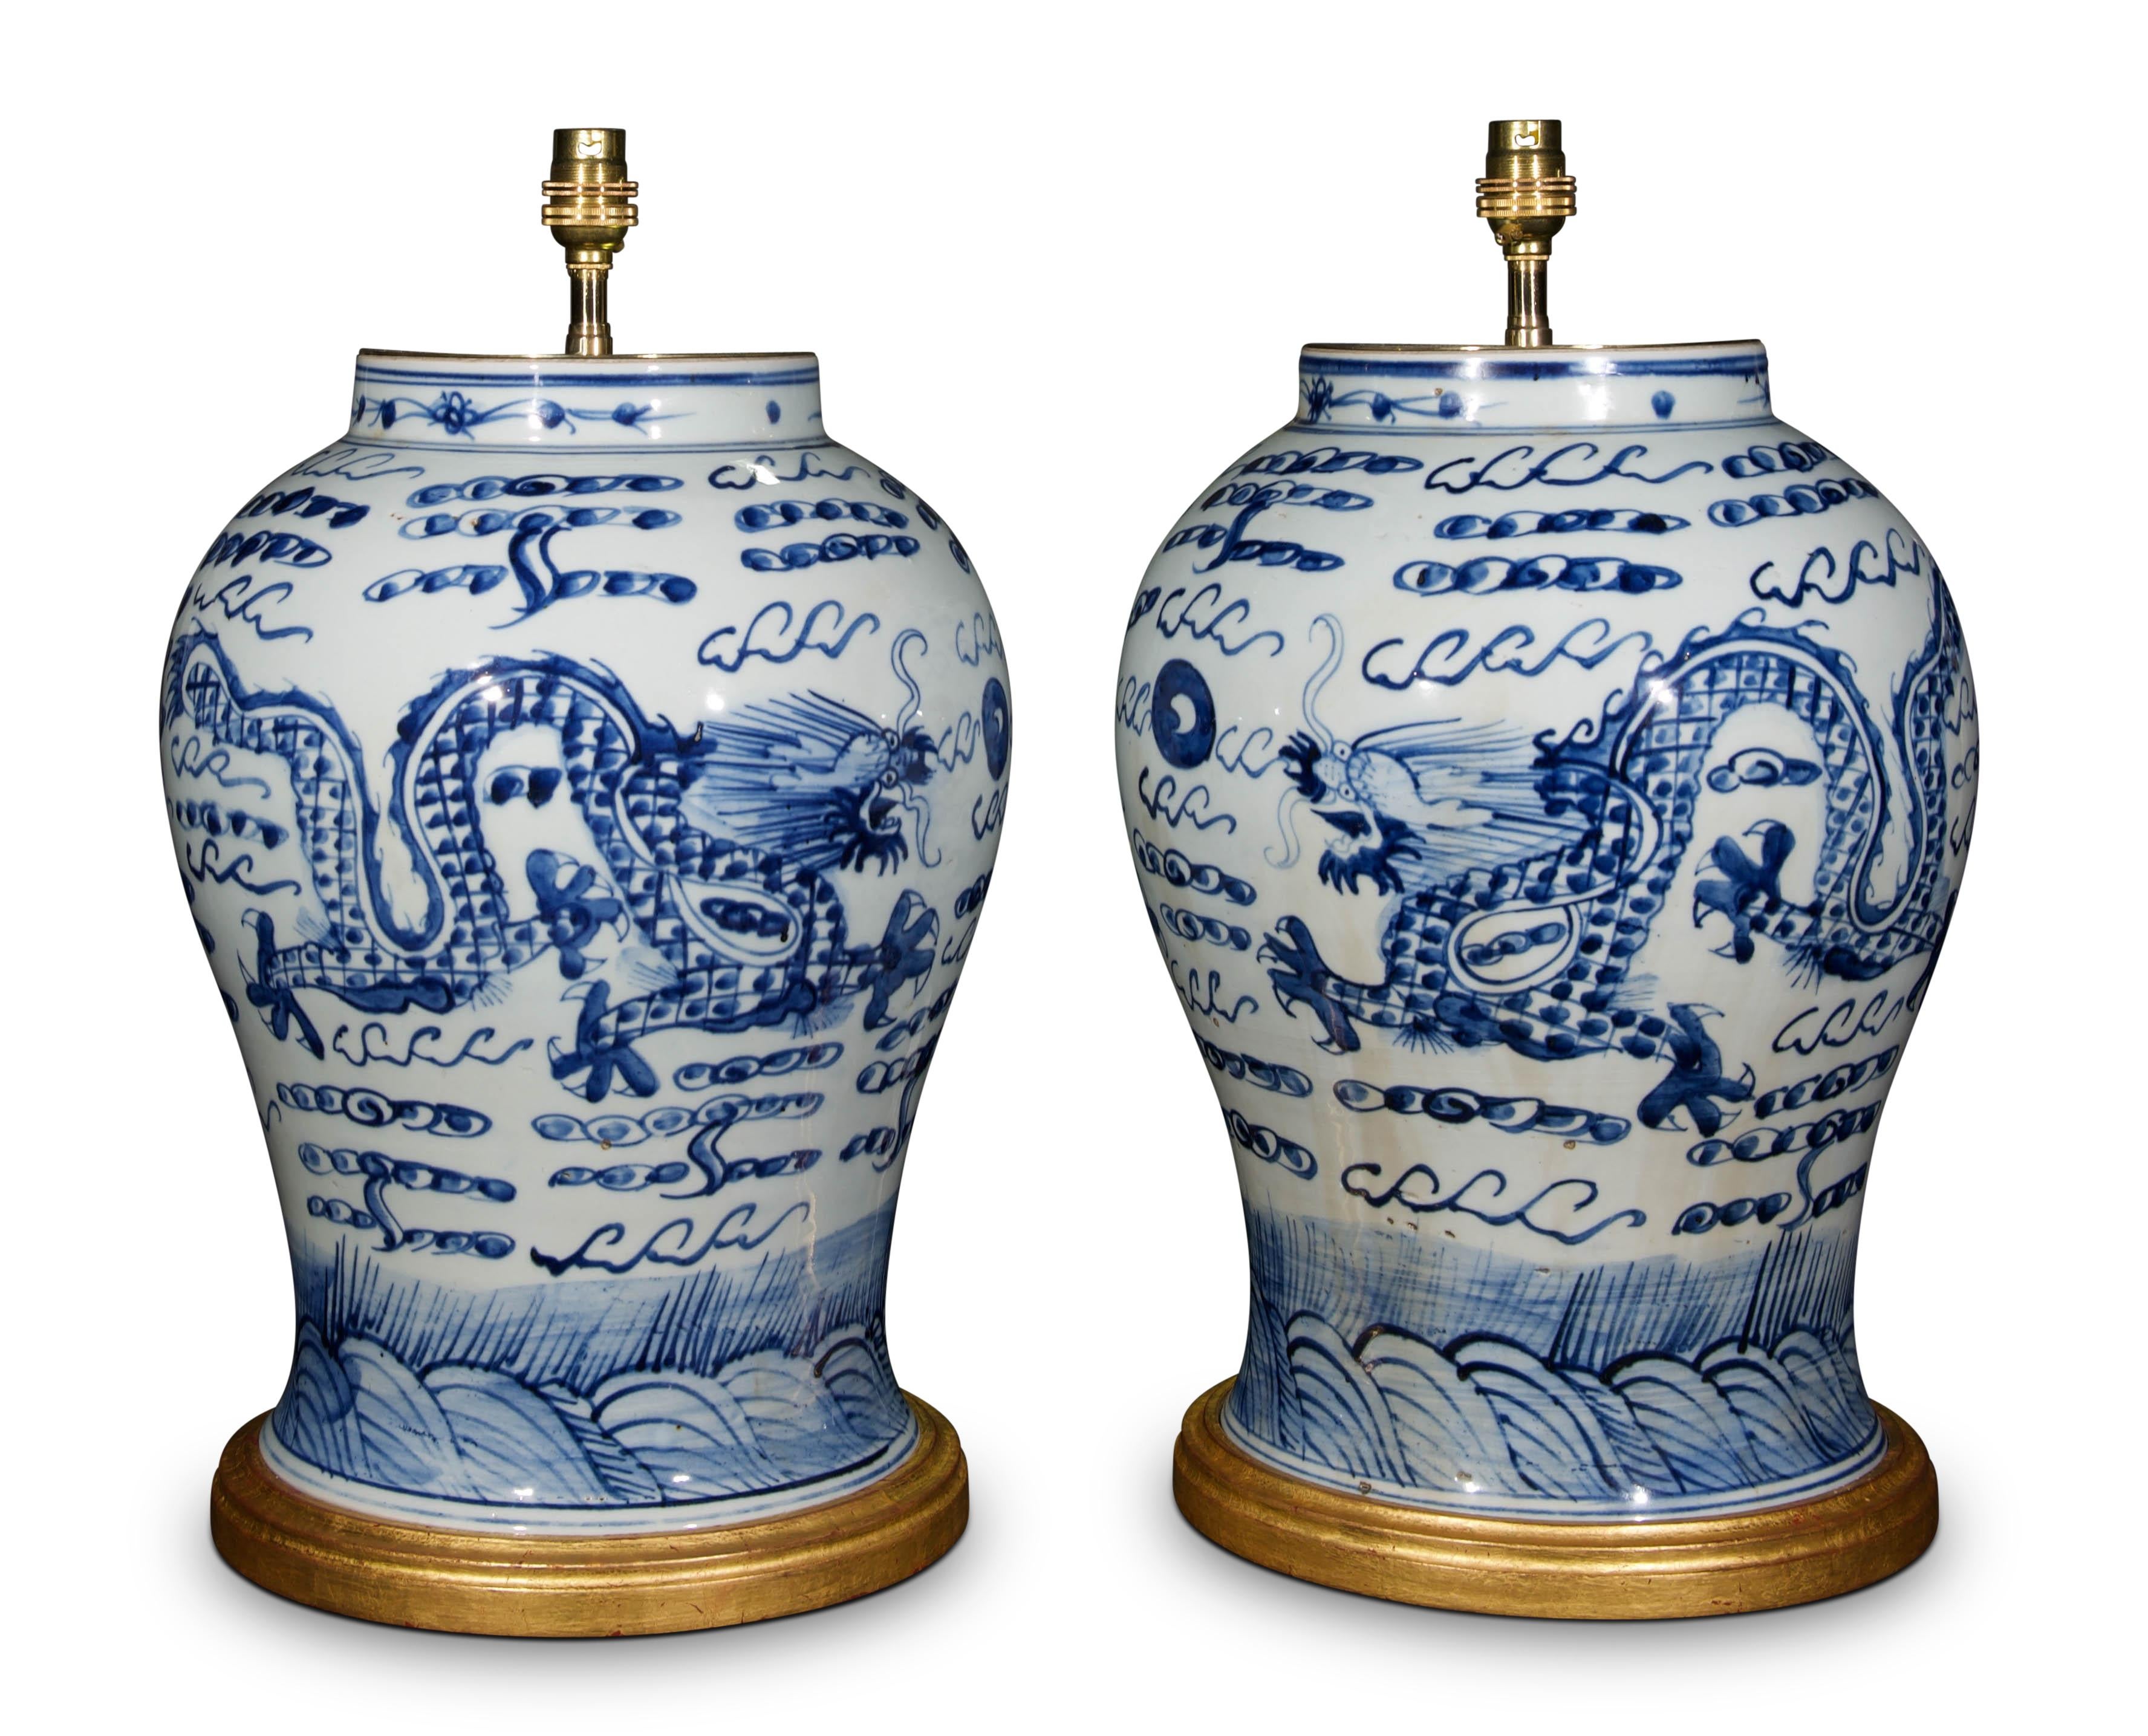 A fine pair of large Chinese blue and white baluster vases, decorated in the Kangxi style, with stylised Dogs of Fo depicted amongst a foliate landscape, now mounted as lamps with hand gilded turned bases.

Measures: Height of vases: 18 3/4 in